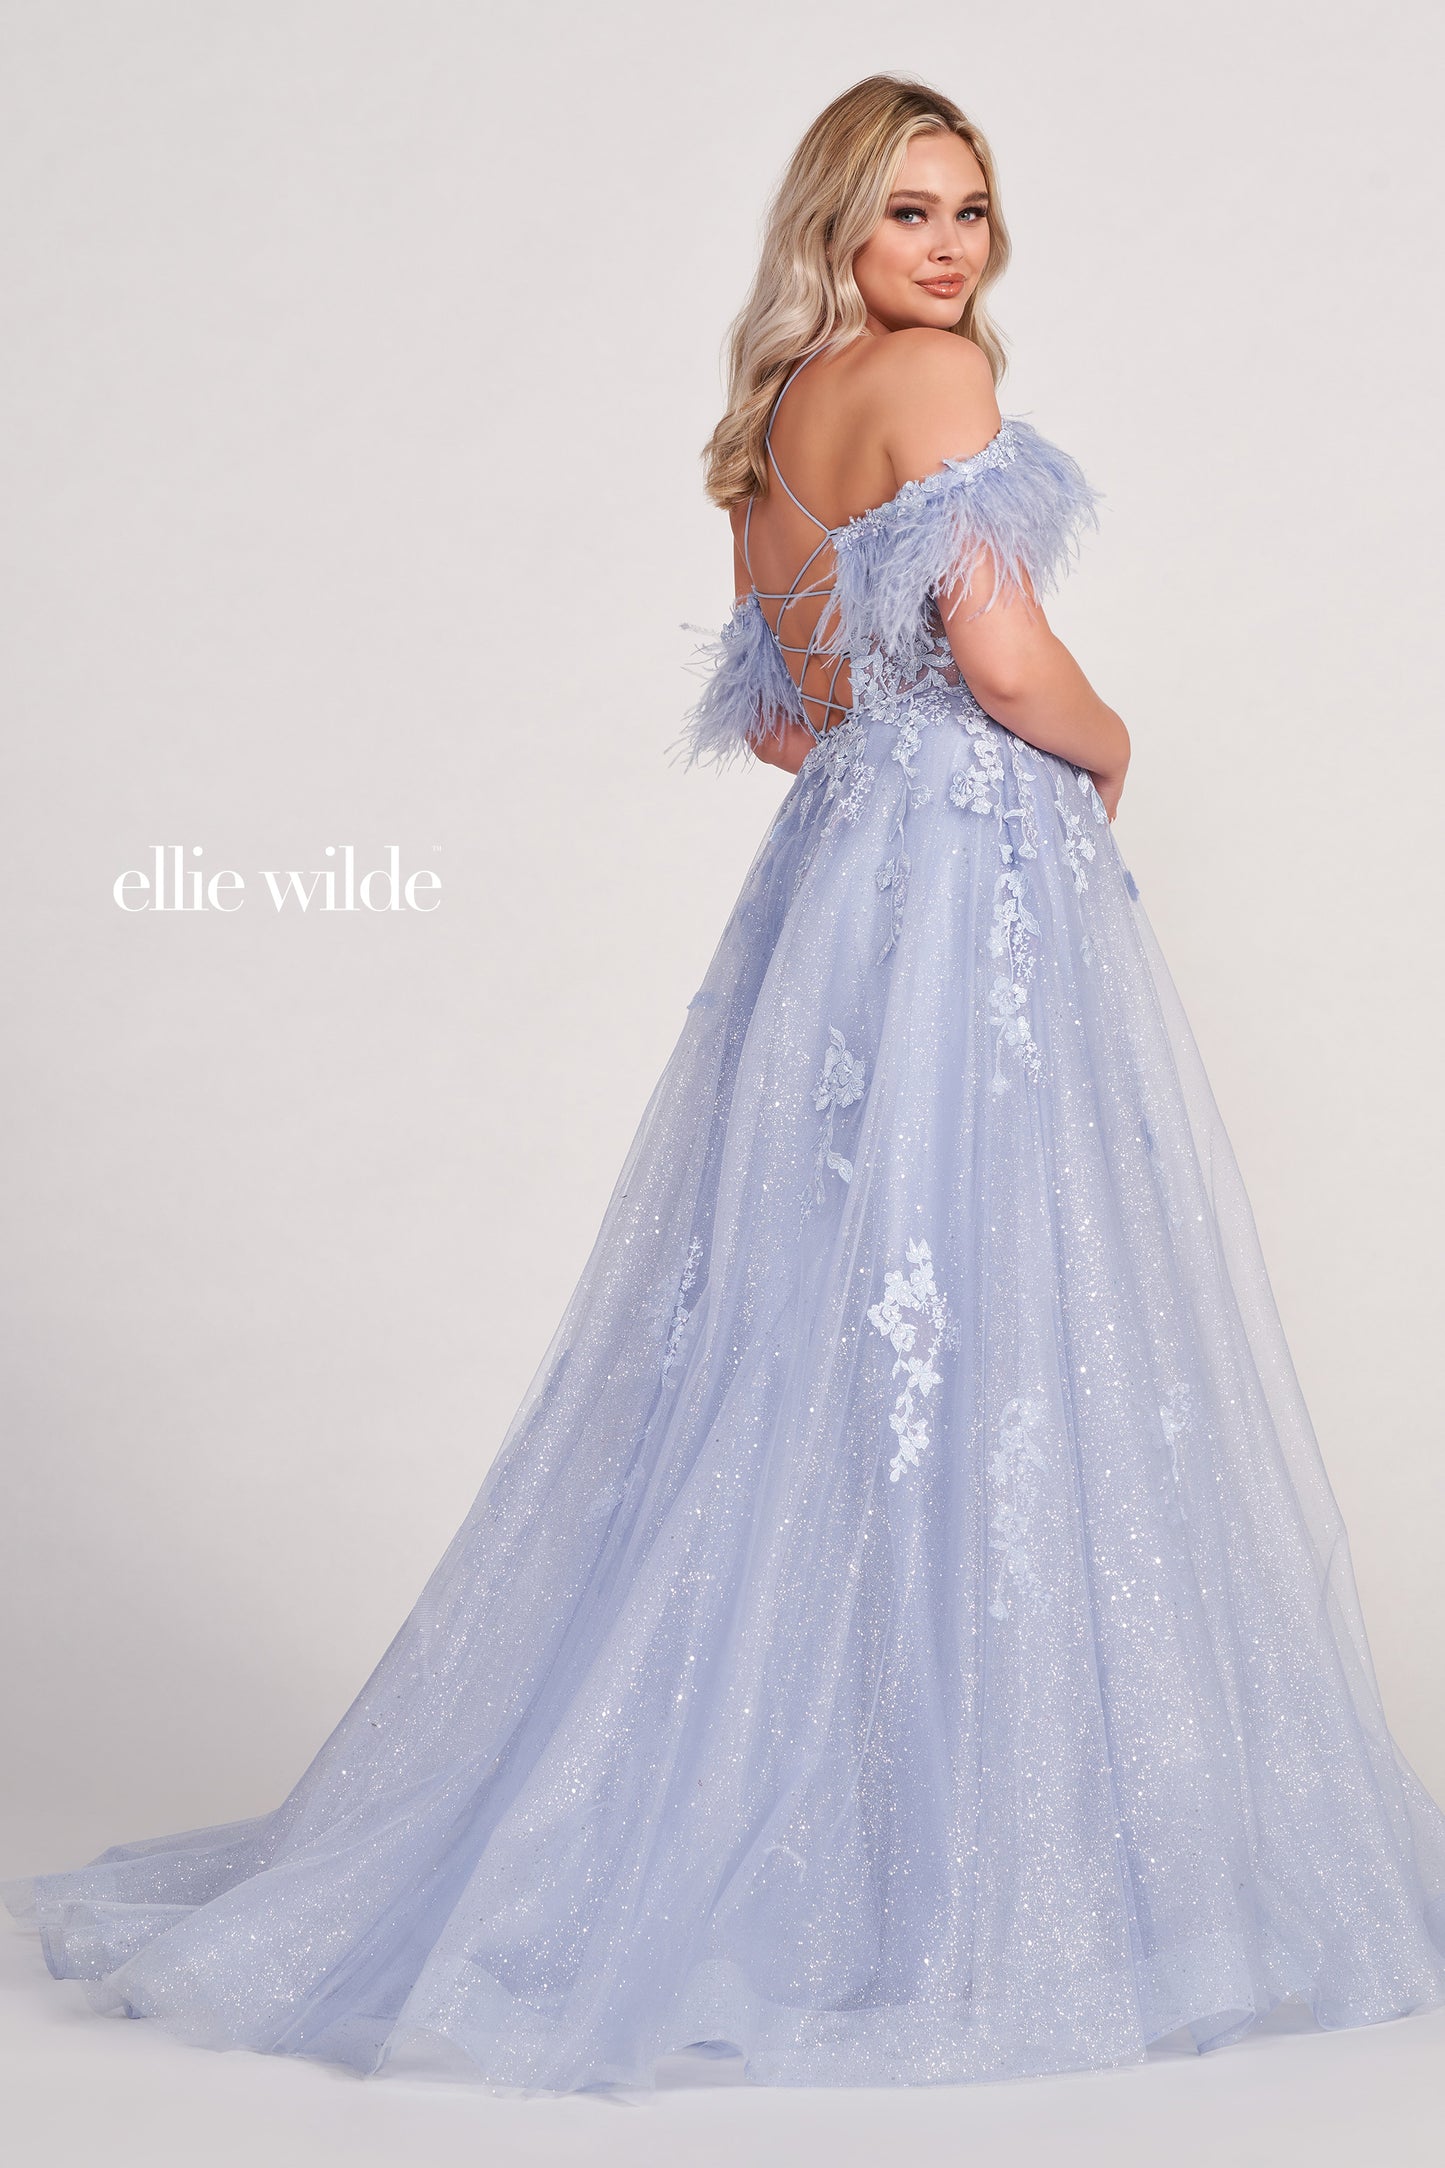 The Ellie Wilde EW34066 is a stunning A-line gown with a sheer sequin corset and feather off-the-shoulder detail. Boasting a dazzling shimmer finish and dramatic slit, this exquisite dress will make you the belle of the ball.  Sizes: 00-16  Colors: ORANGE, RED, PERIWINKLE, IRIS